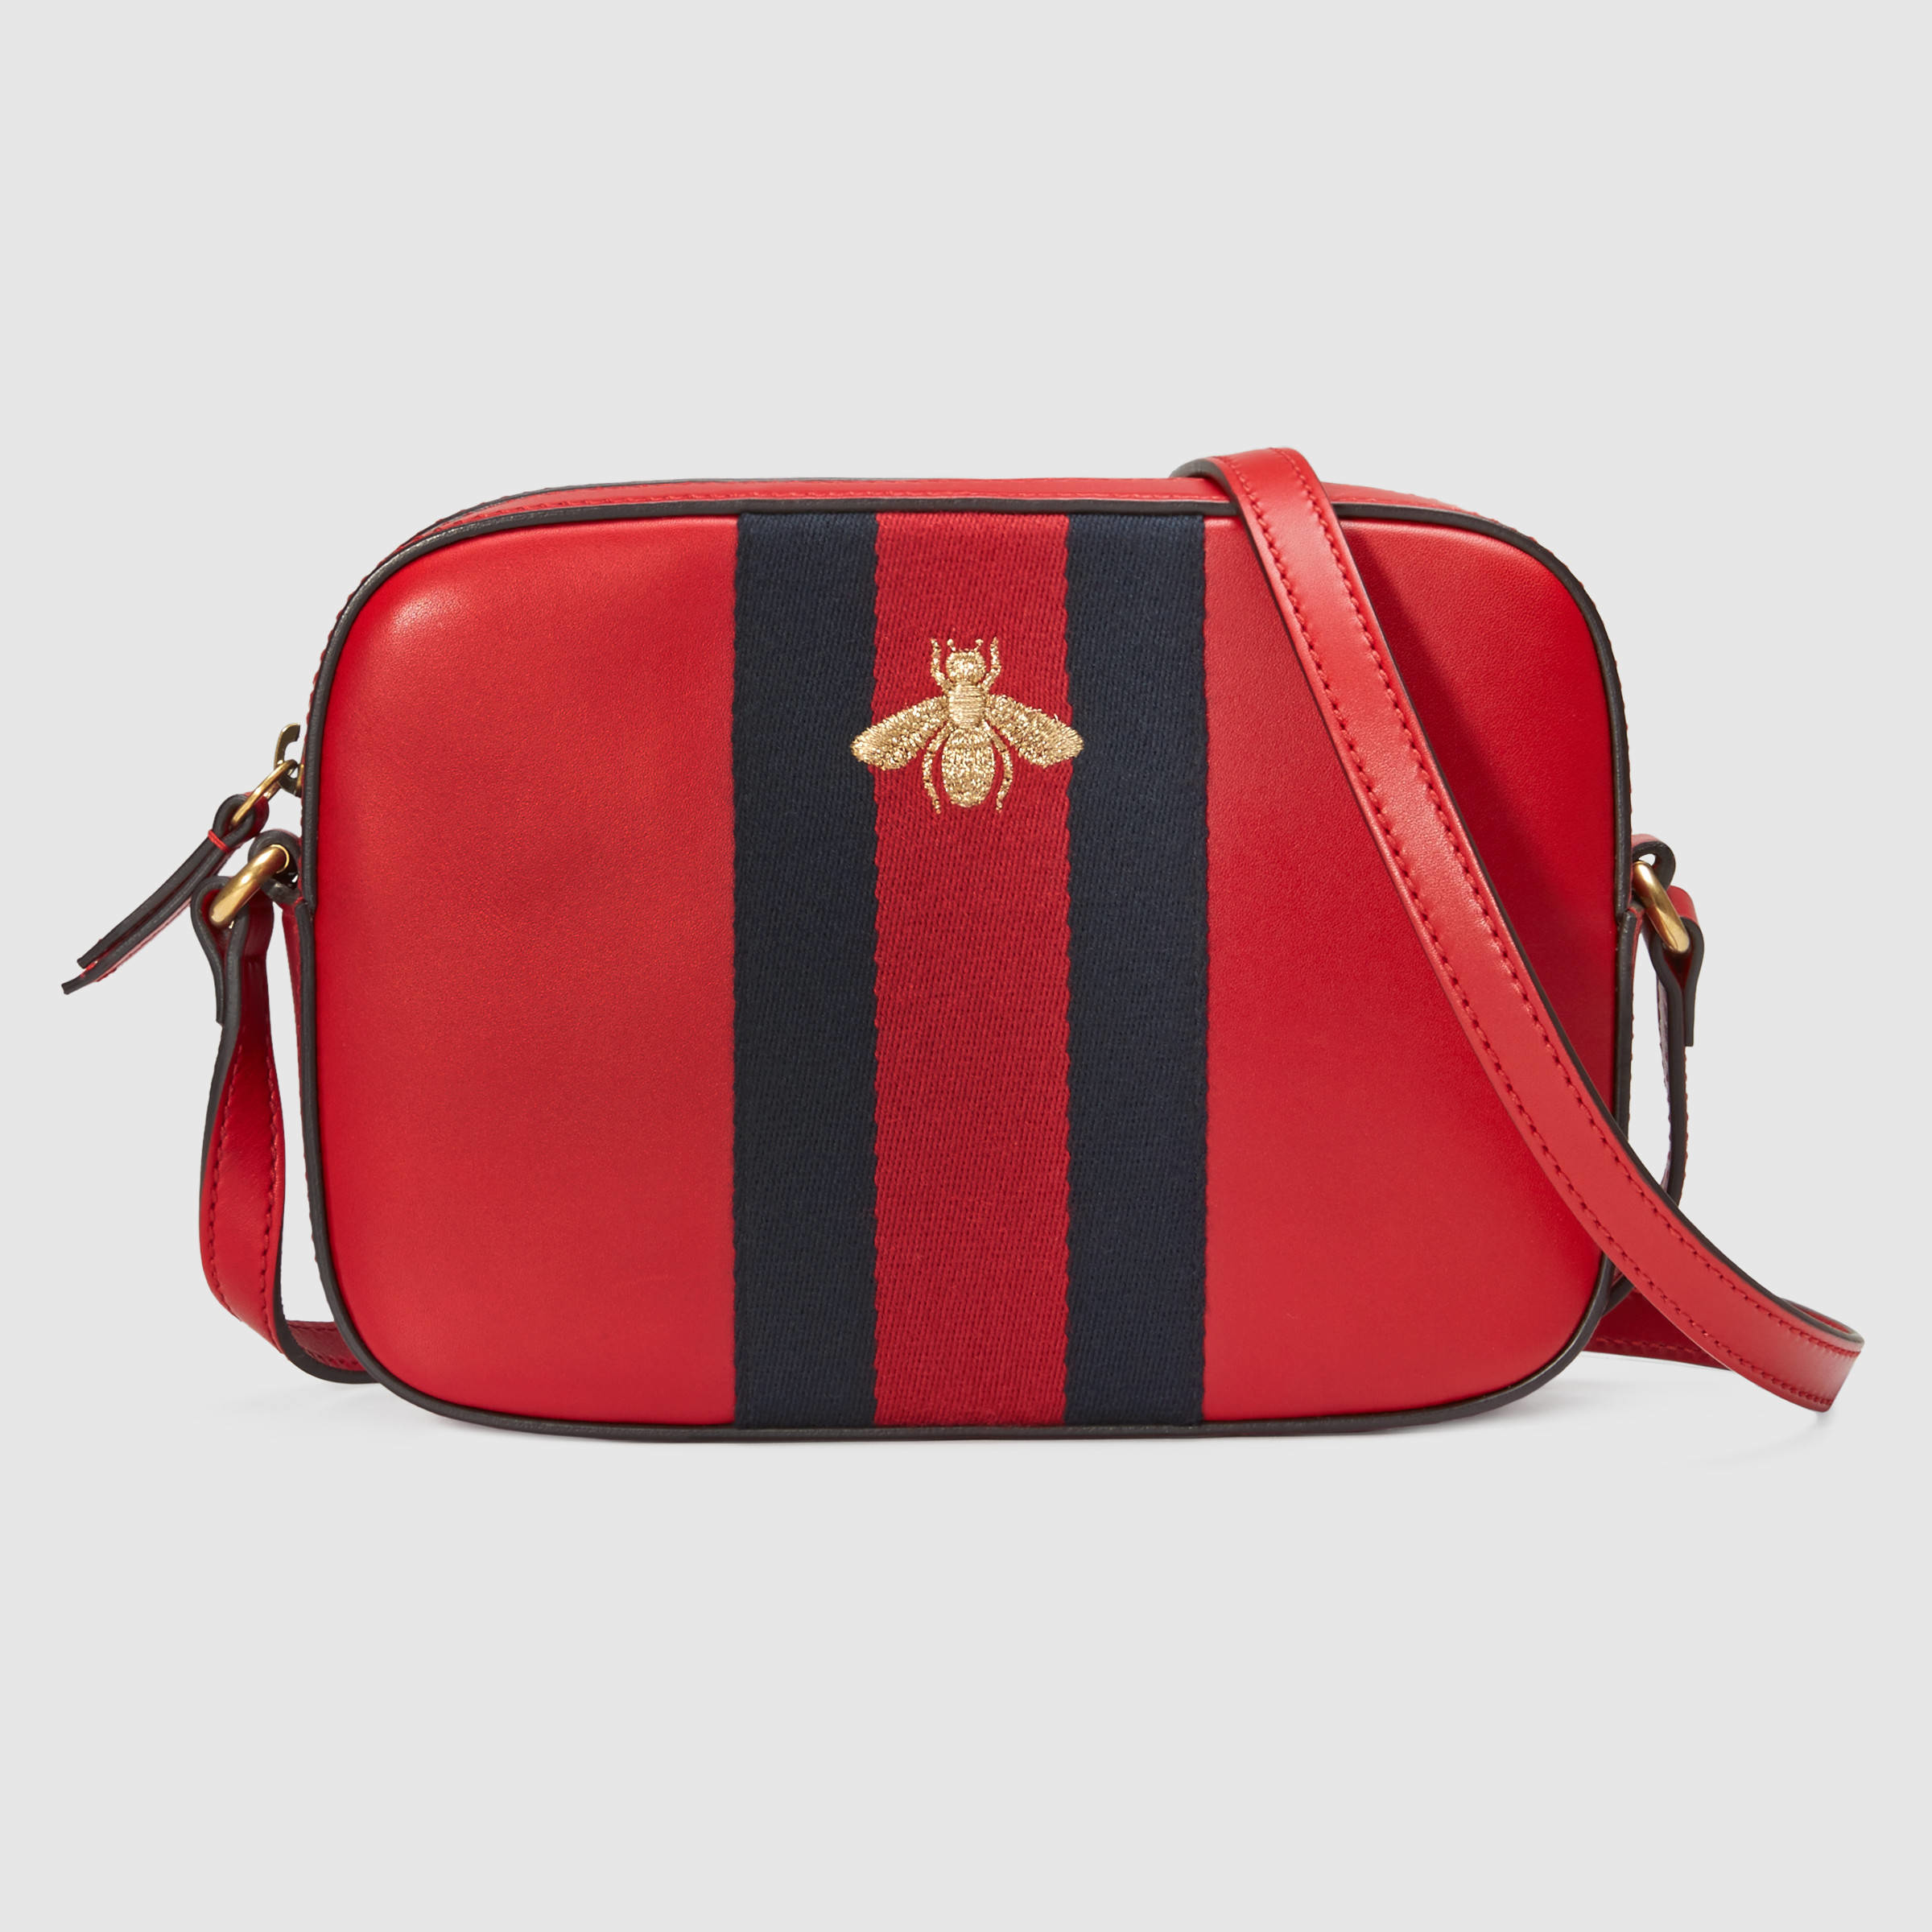 Gucci Bee Web Leather Shoulder Bag in Red - Lyst